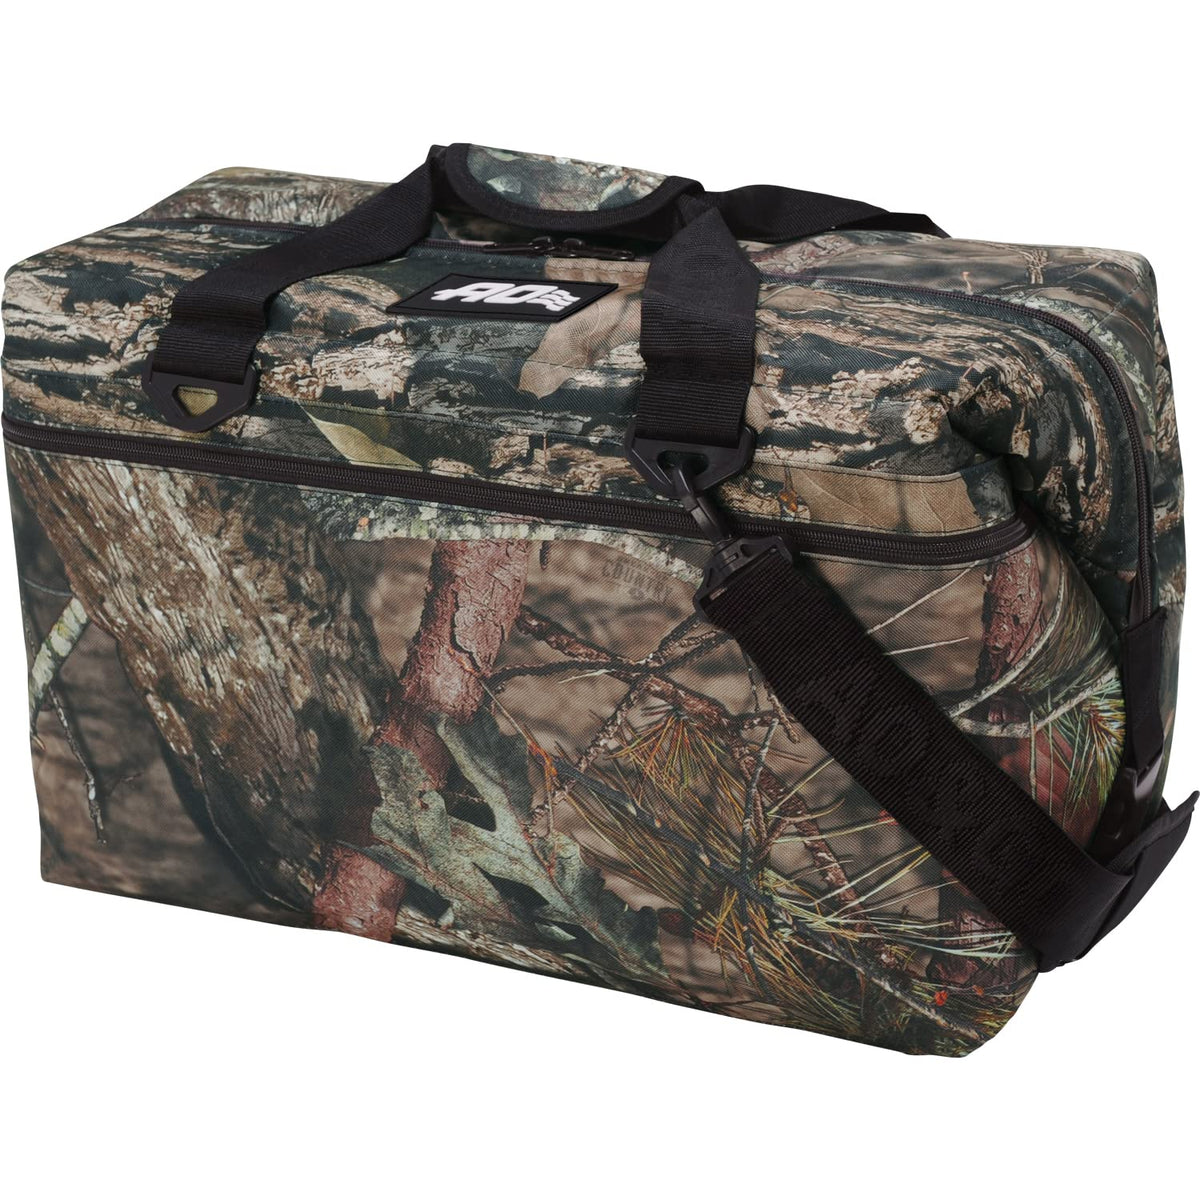 AO Coolers Original Soft Cooler with High-Density Insulation, Mossy Oa —  ROCO 4X4